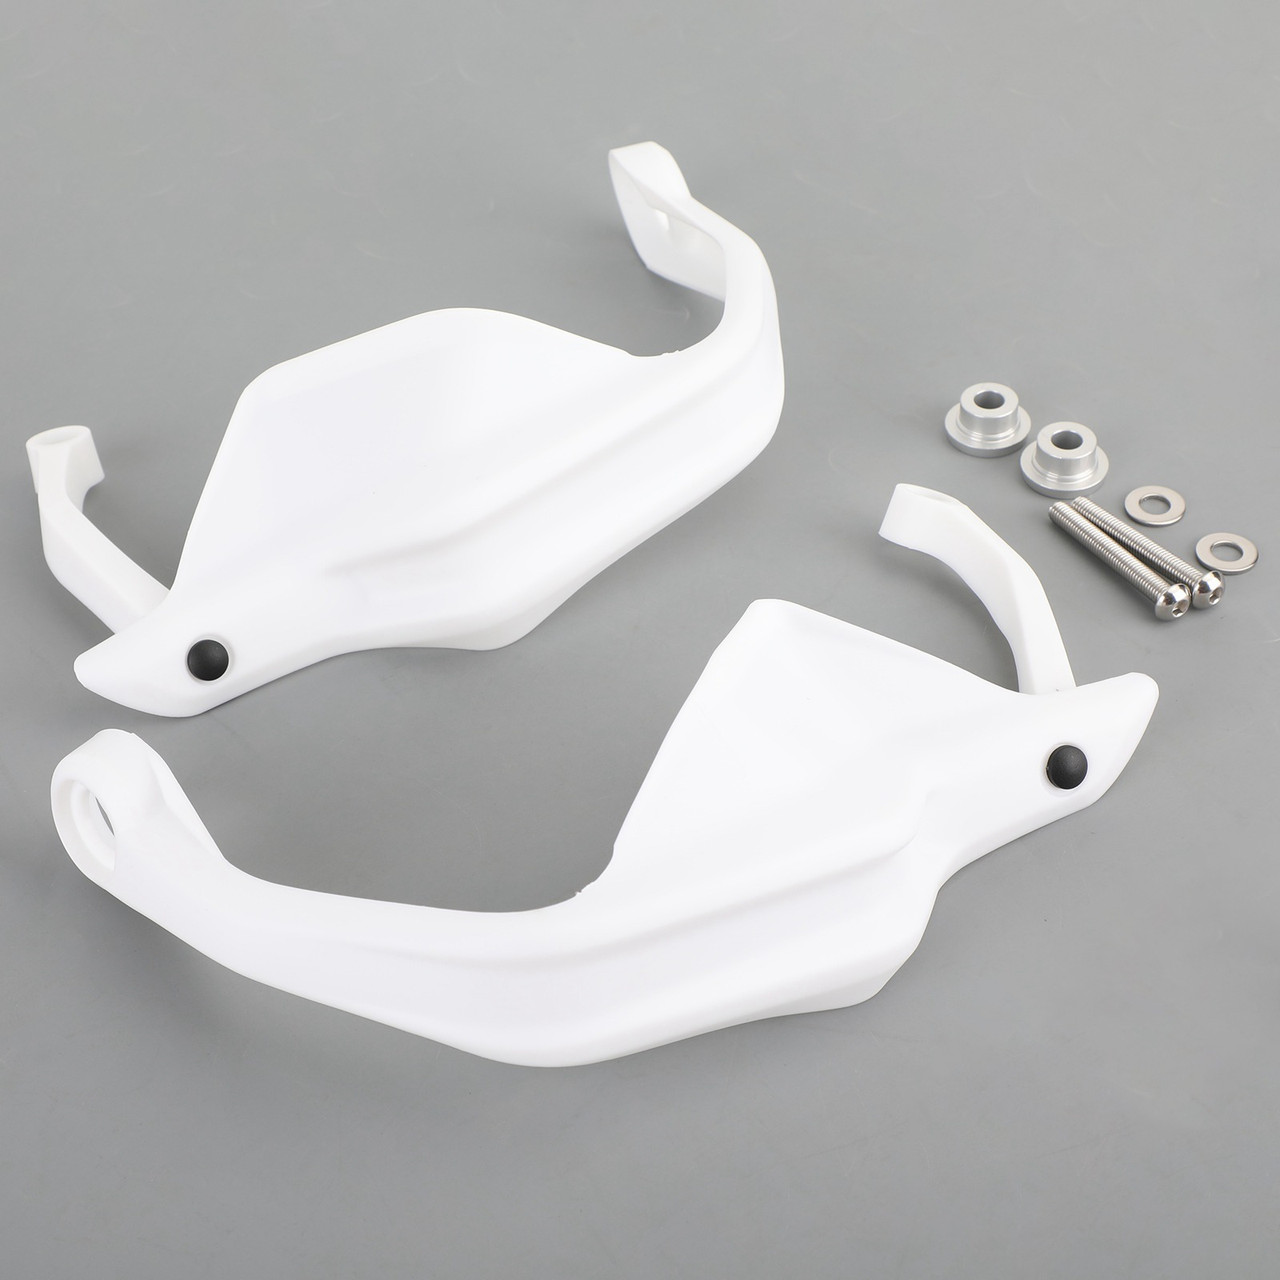 Motorcycle Protector Hand Guards Fits For BMW S1000XR 13-18 BMW F800GS ADV 13-18 BMW R1200GS LC 13-18 BMW R1200GS ADV 14-18 BMW R1250GS 18-19 White